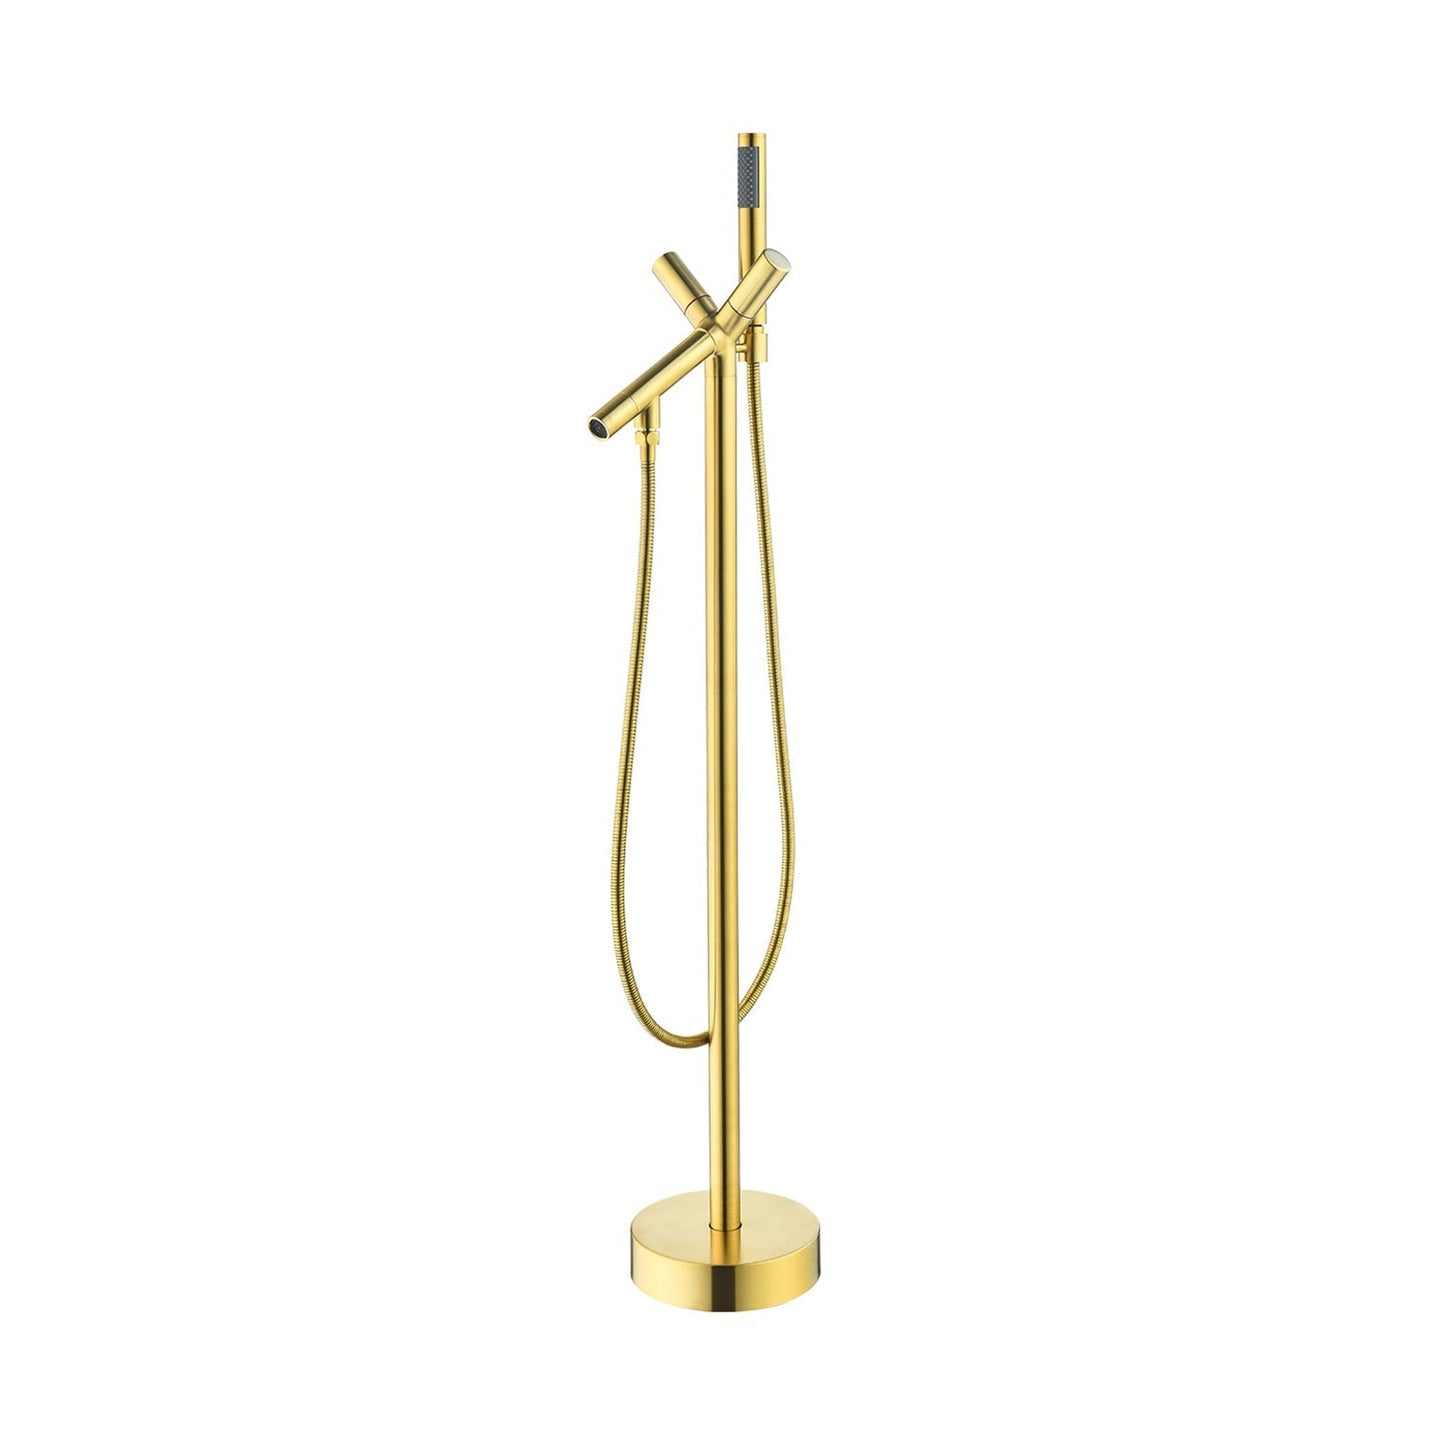 Altair Brulon Brushed Gold Double Knob Handle Freestanding Bathtub Faucet With Handshower